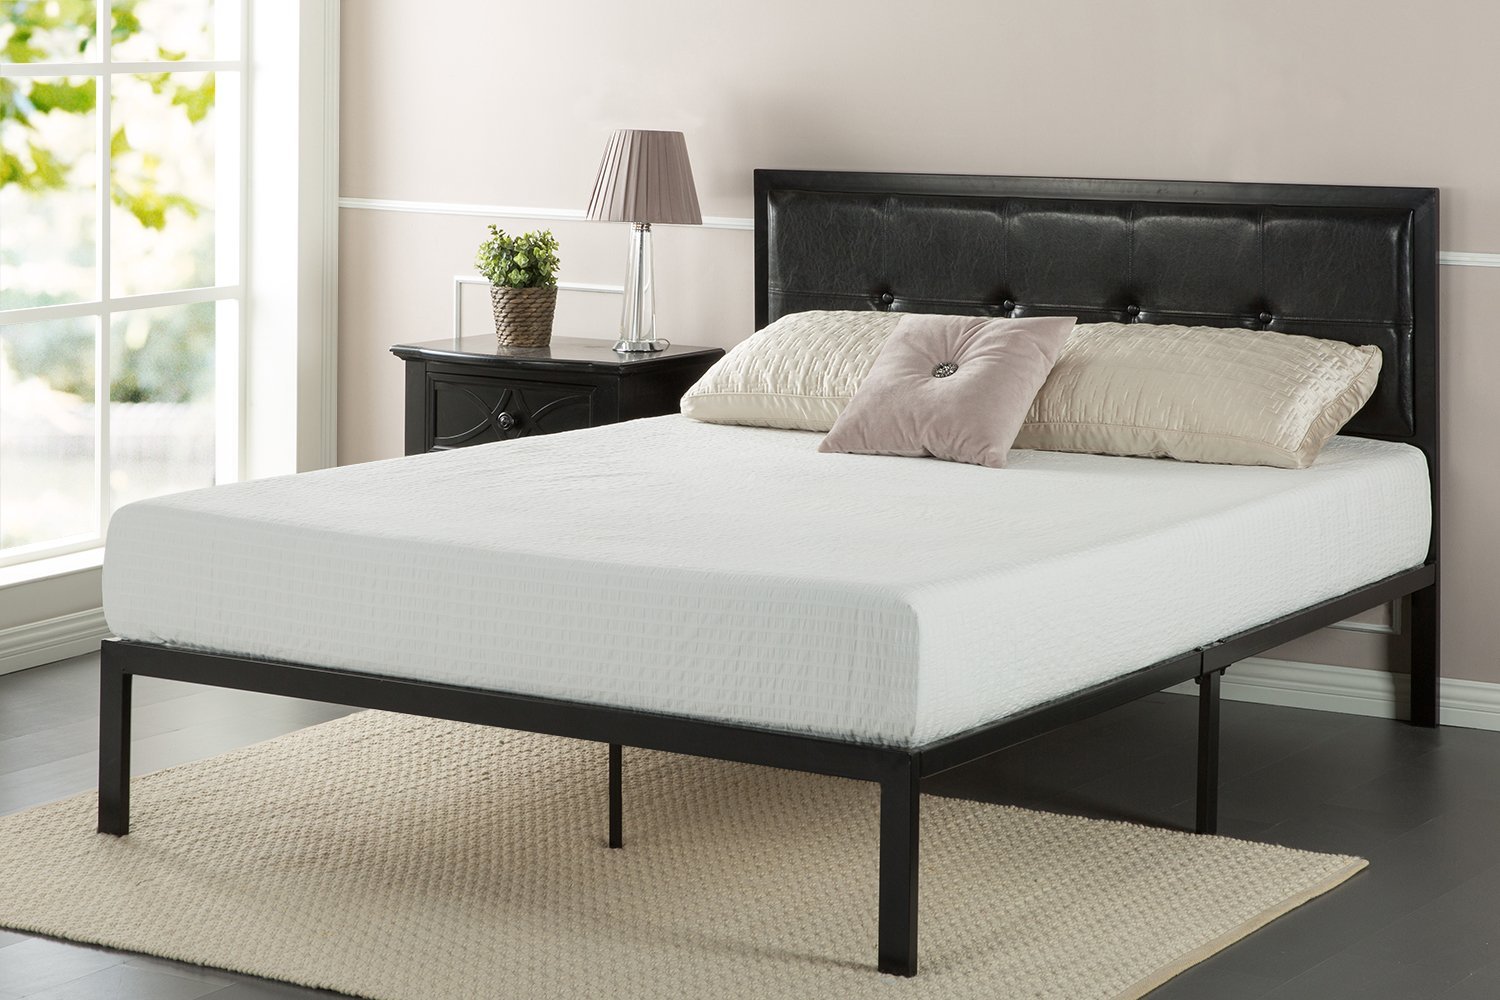 Top Rated Affordable Platform Beds You, Zinus Metal Platform Bed Frame With Headboard And Footboard Premium King Size